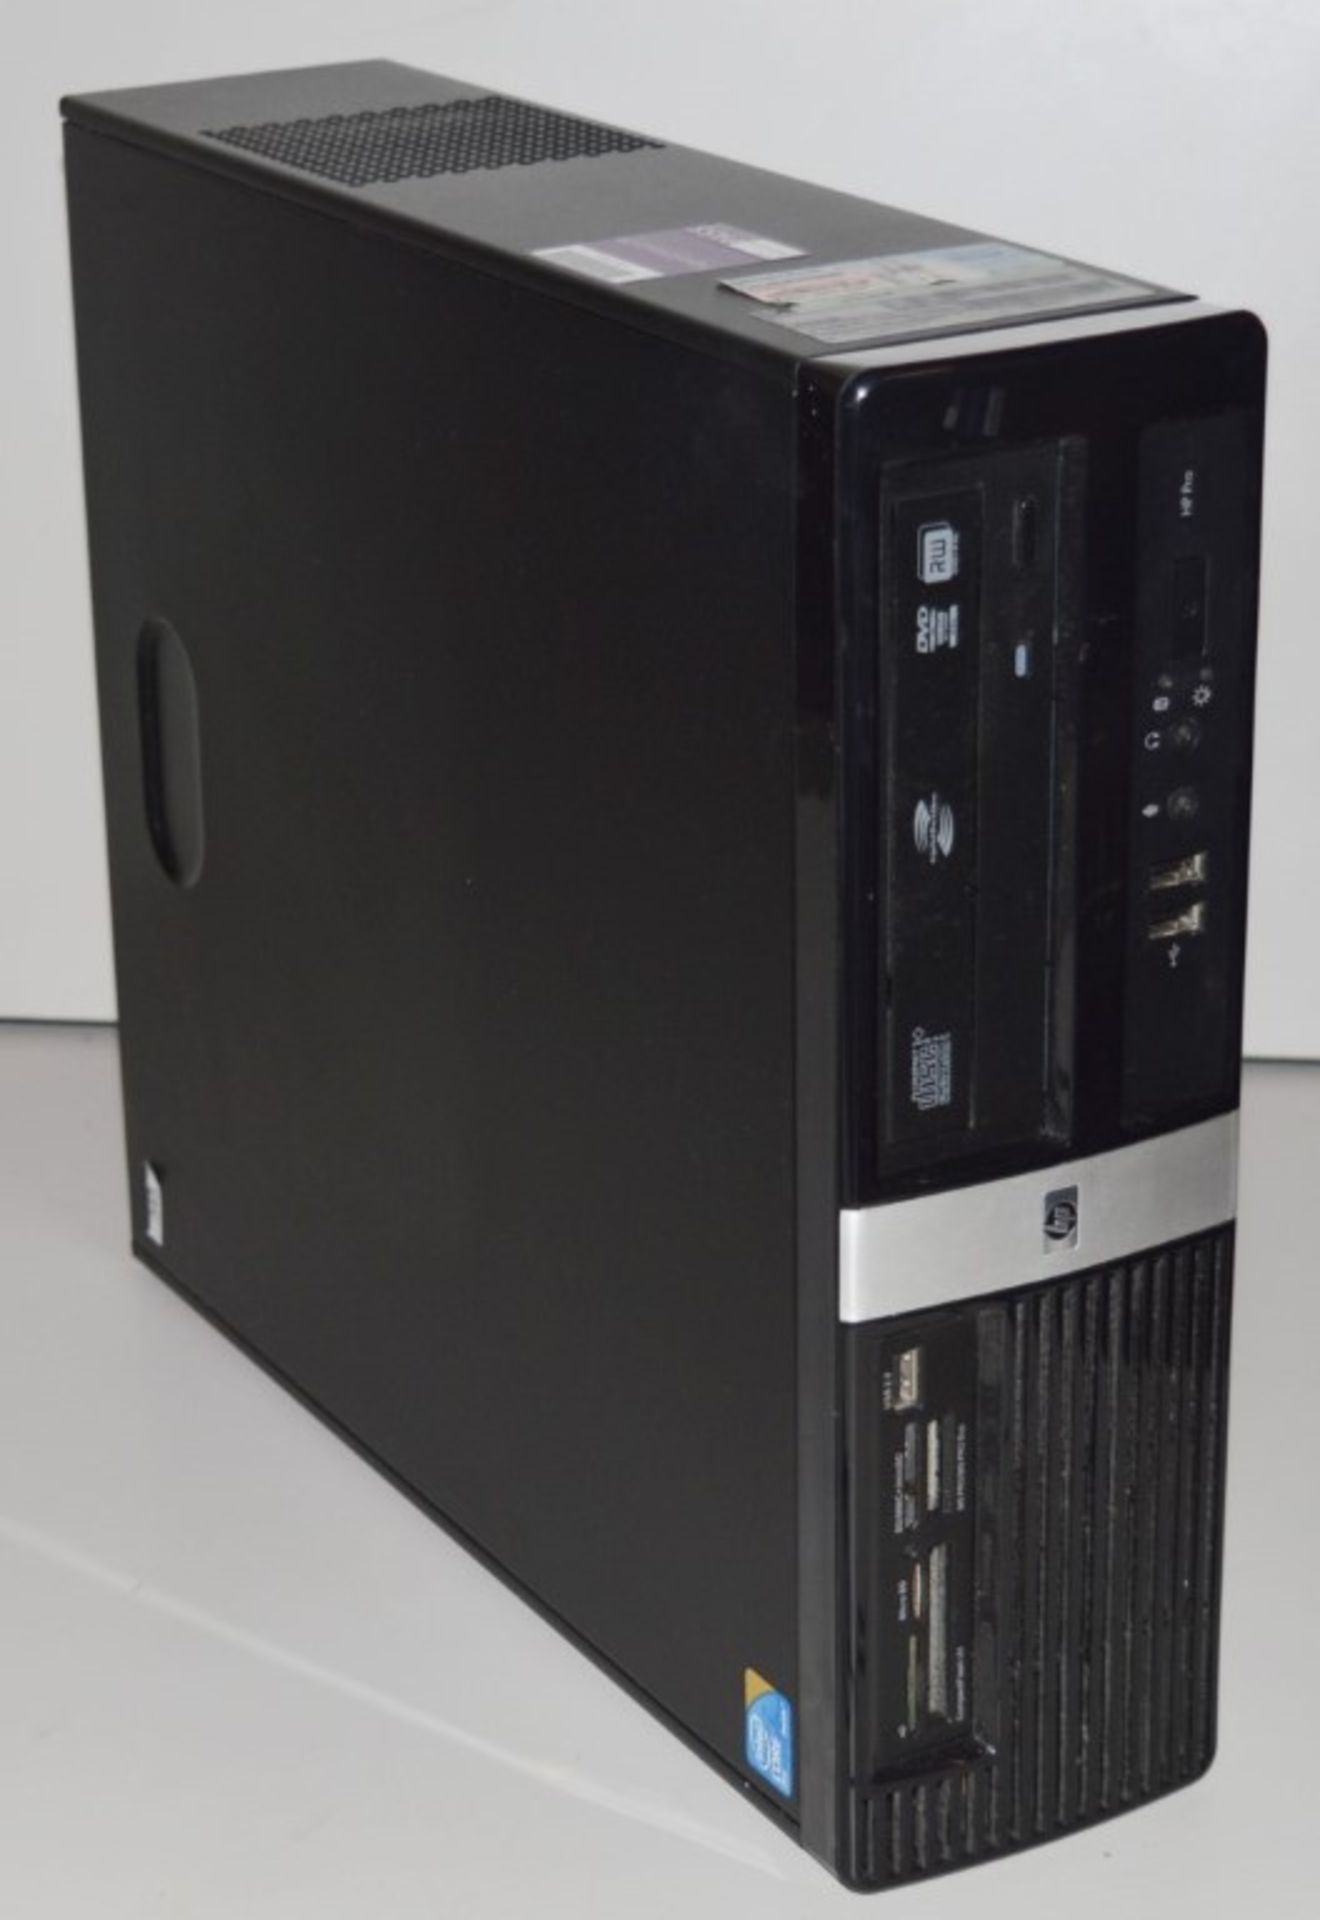 1 x HP Pro 3010 Small Form Factor PC - Features Intel Core 2 Duo 2.9ghz Processor, 4gb DDR3 Ram, - Image 2 of 3